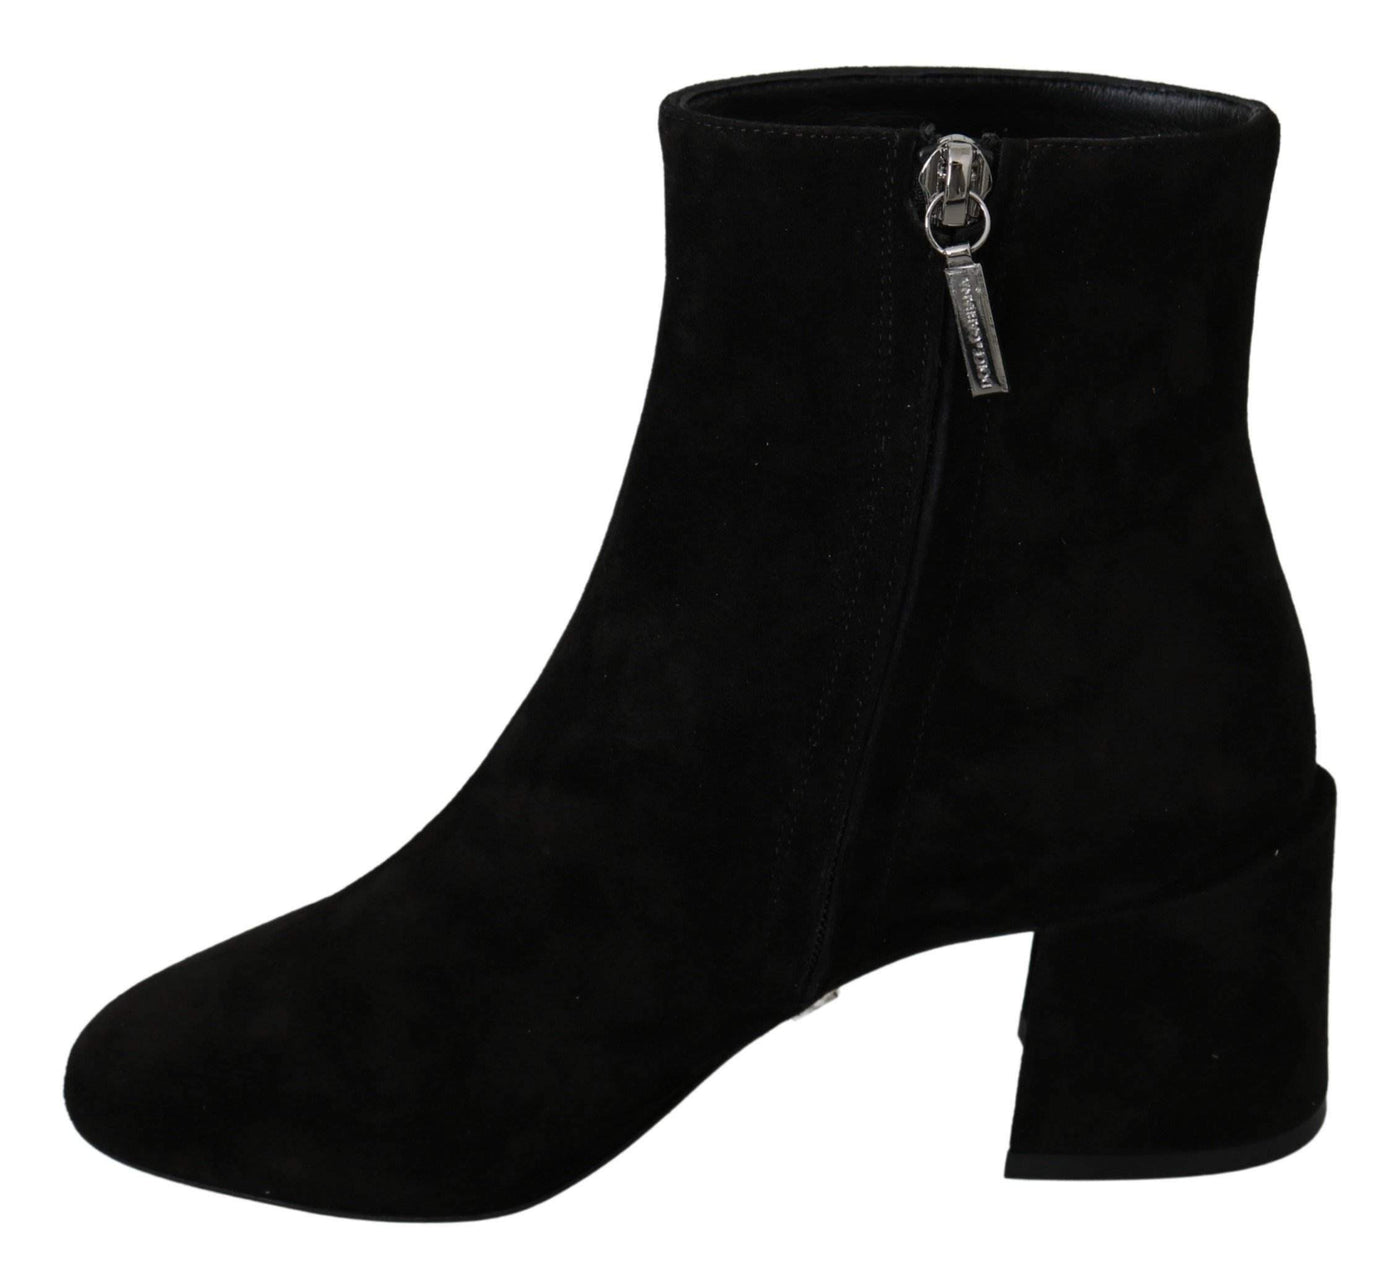 Dolce & Gabbana  Black Suede L'Amore E'Bellezza Boots Shoes #women, Black, Boots - Women - Shoes, Brand_Dolce & Gabbana, Catch, Category_Shoes, Dolce & Gabbana, EU35/US4.5, feed-agegroup-adult, feed-color-black, feed-gender-female, feed-size-US4.5, Gender_Women, Kogan, Shoes - New Arrivals at SEYMAYKA